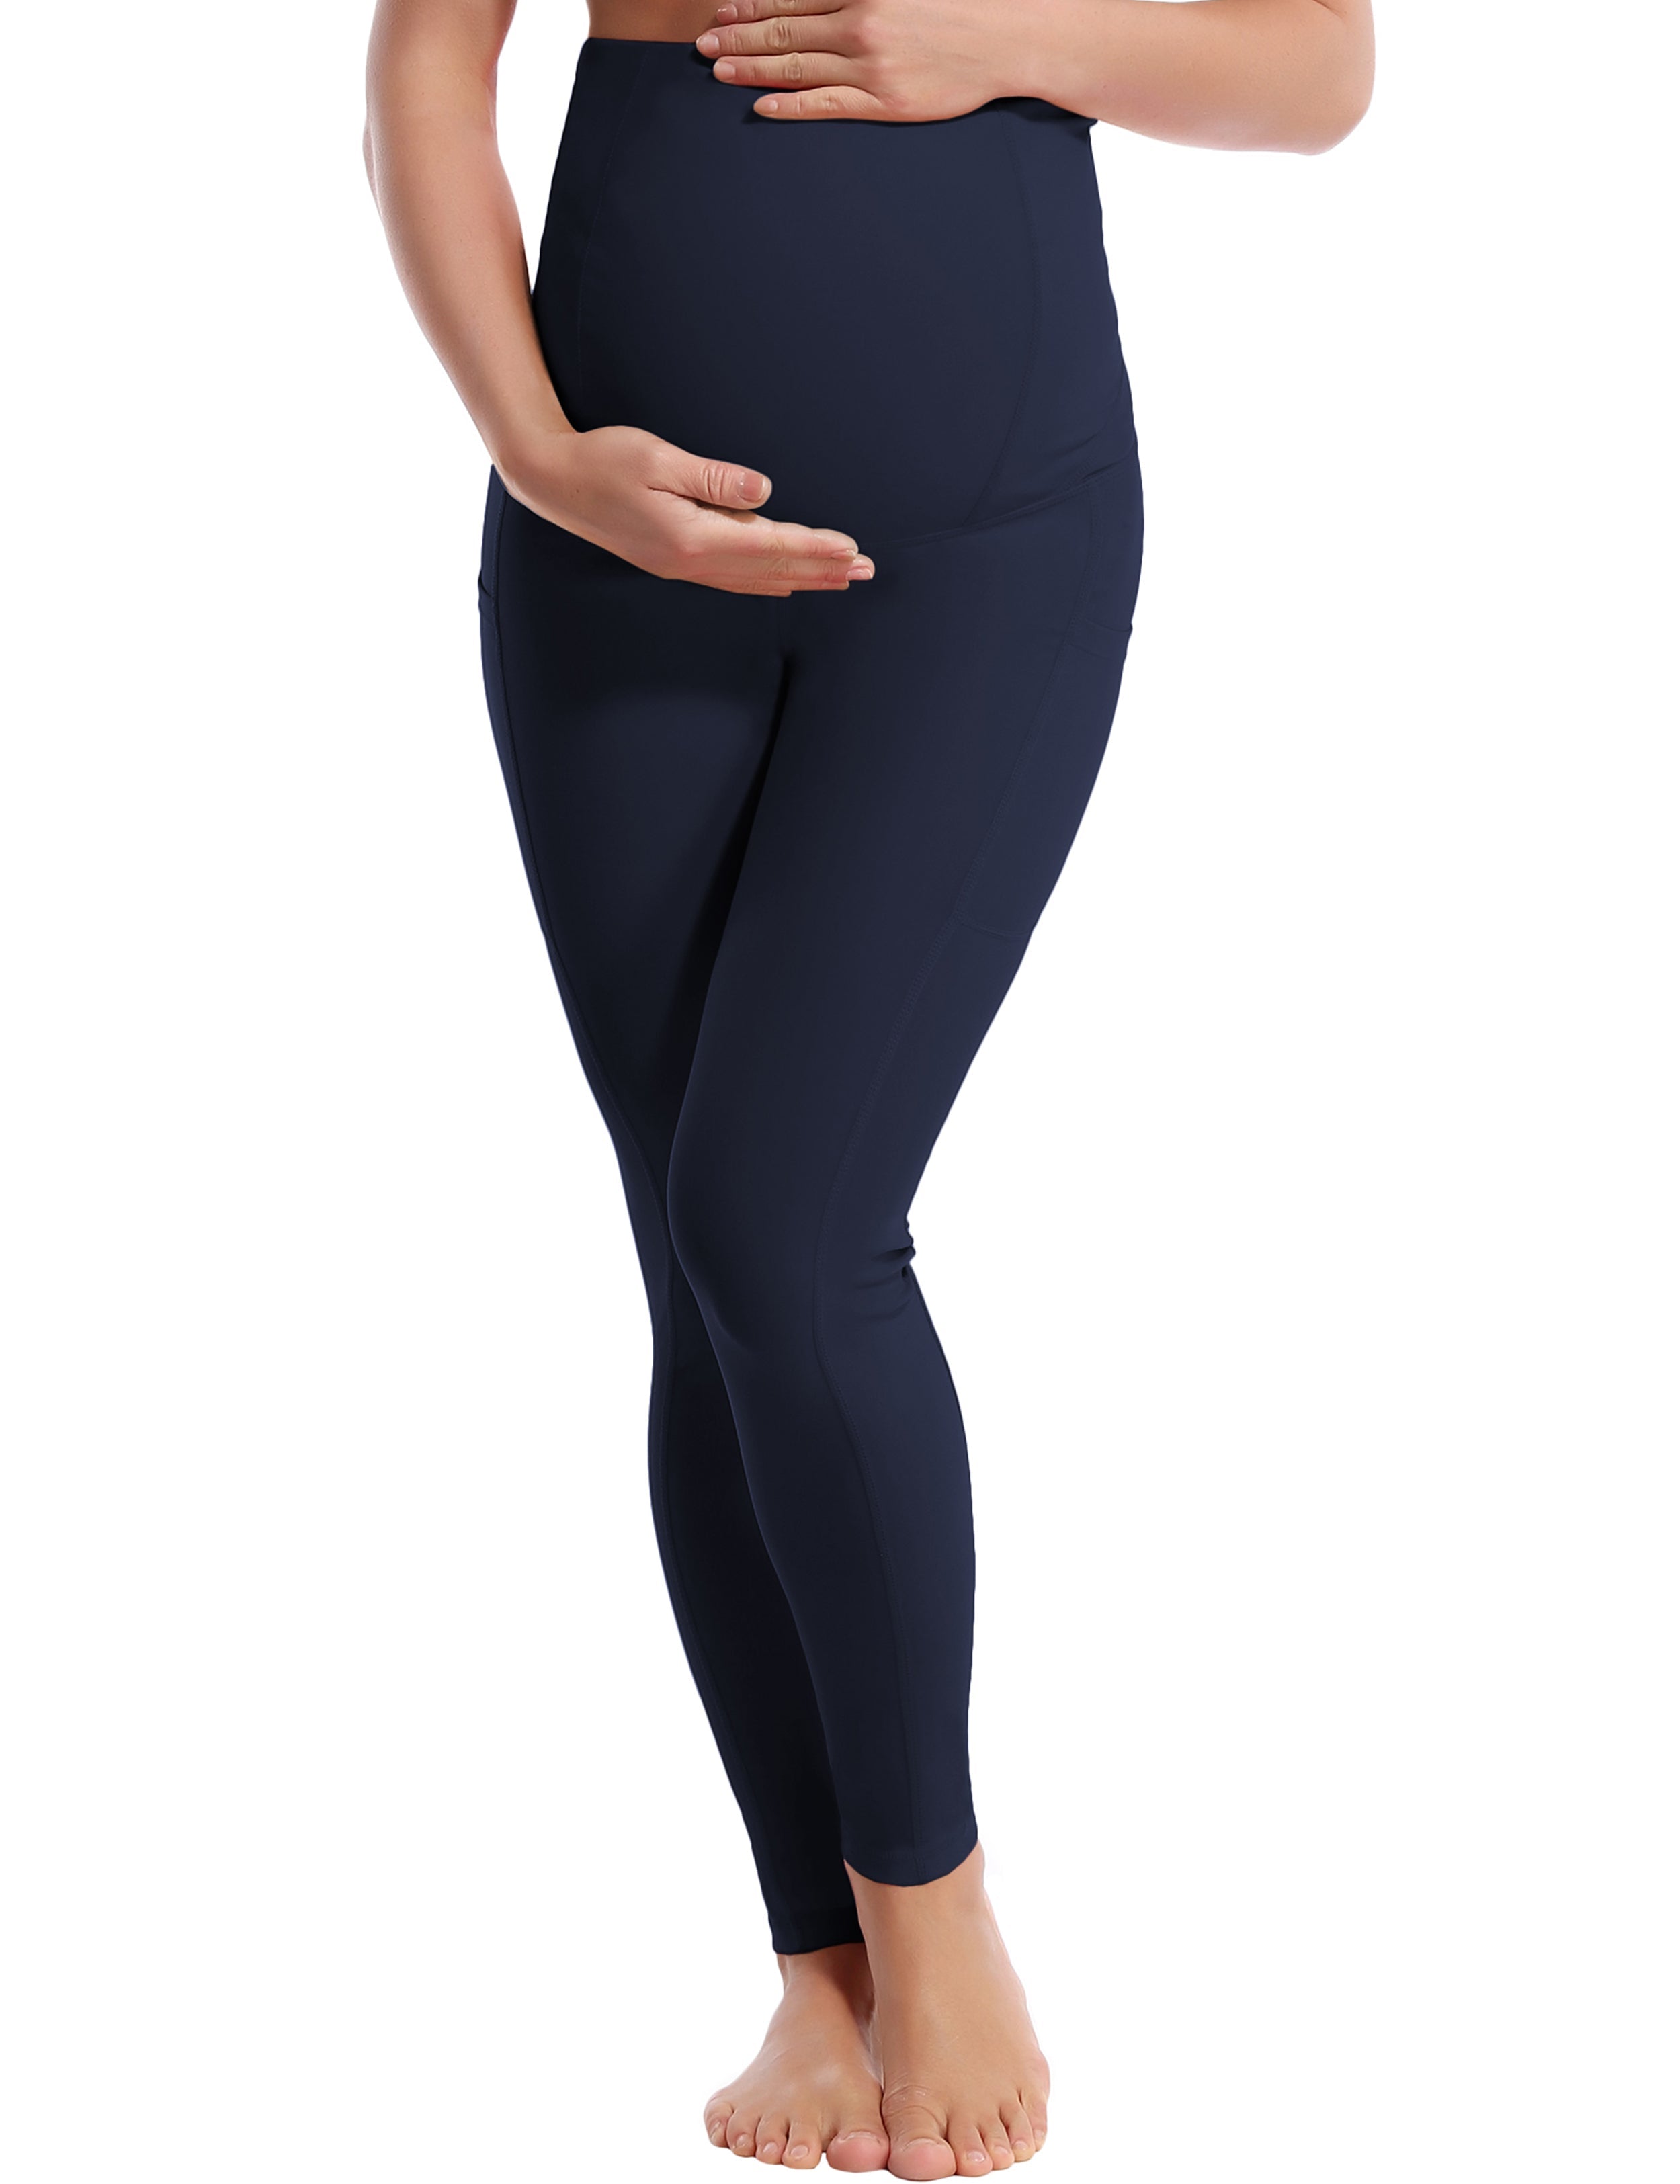 26" Side Pockets Maternity Golf Pants darknavy 87%Nylon/13%Spandex Softest-ever fabric High elasticity 4-way stretch Fabric doesn't attract lint easily No see-through Moisture-wicking Machine wash